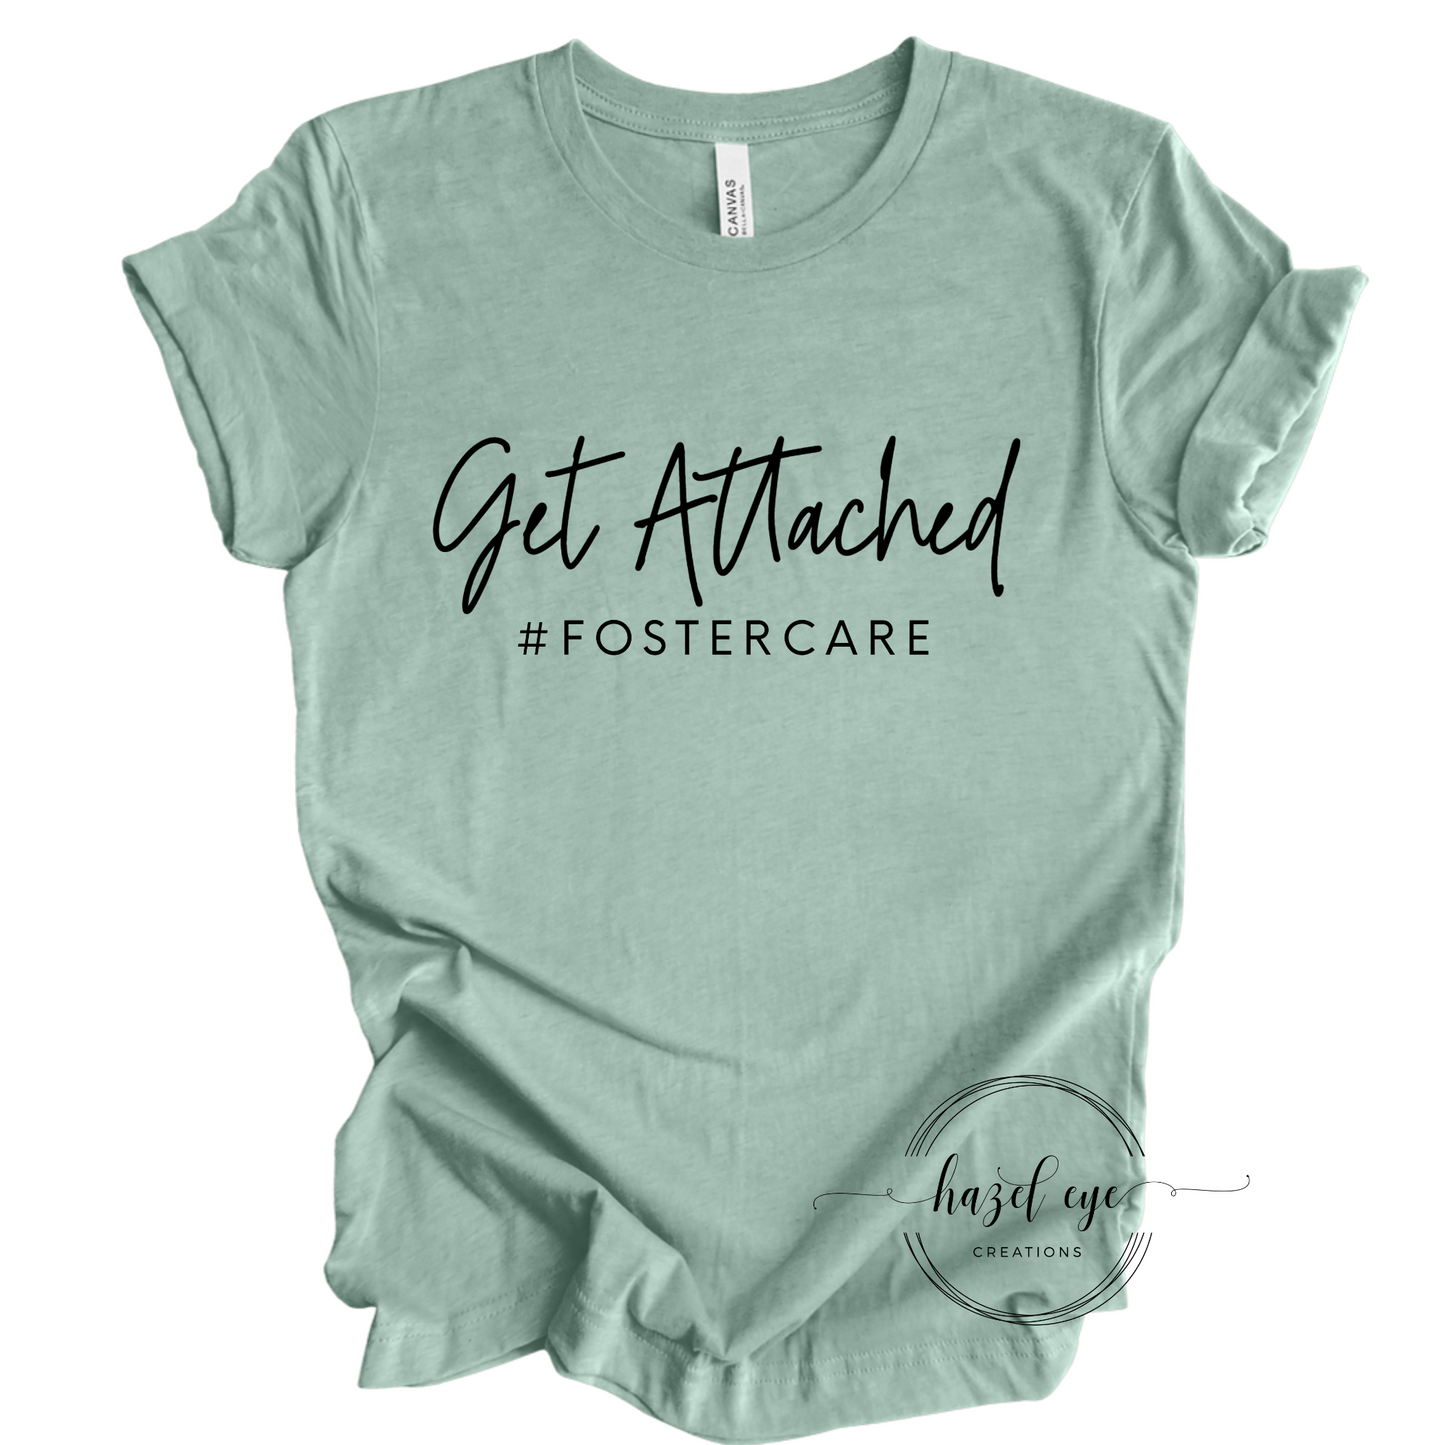 Get attached